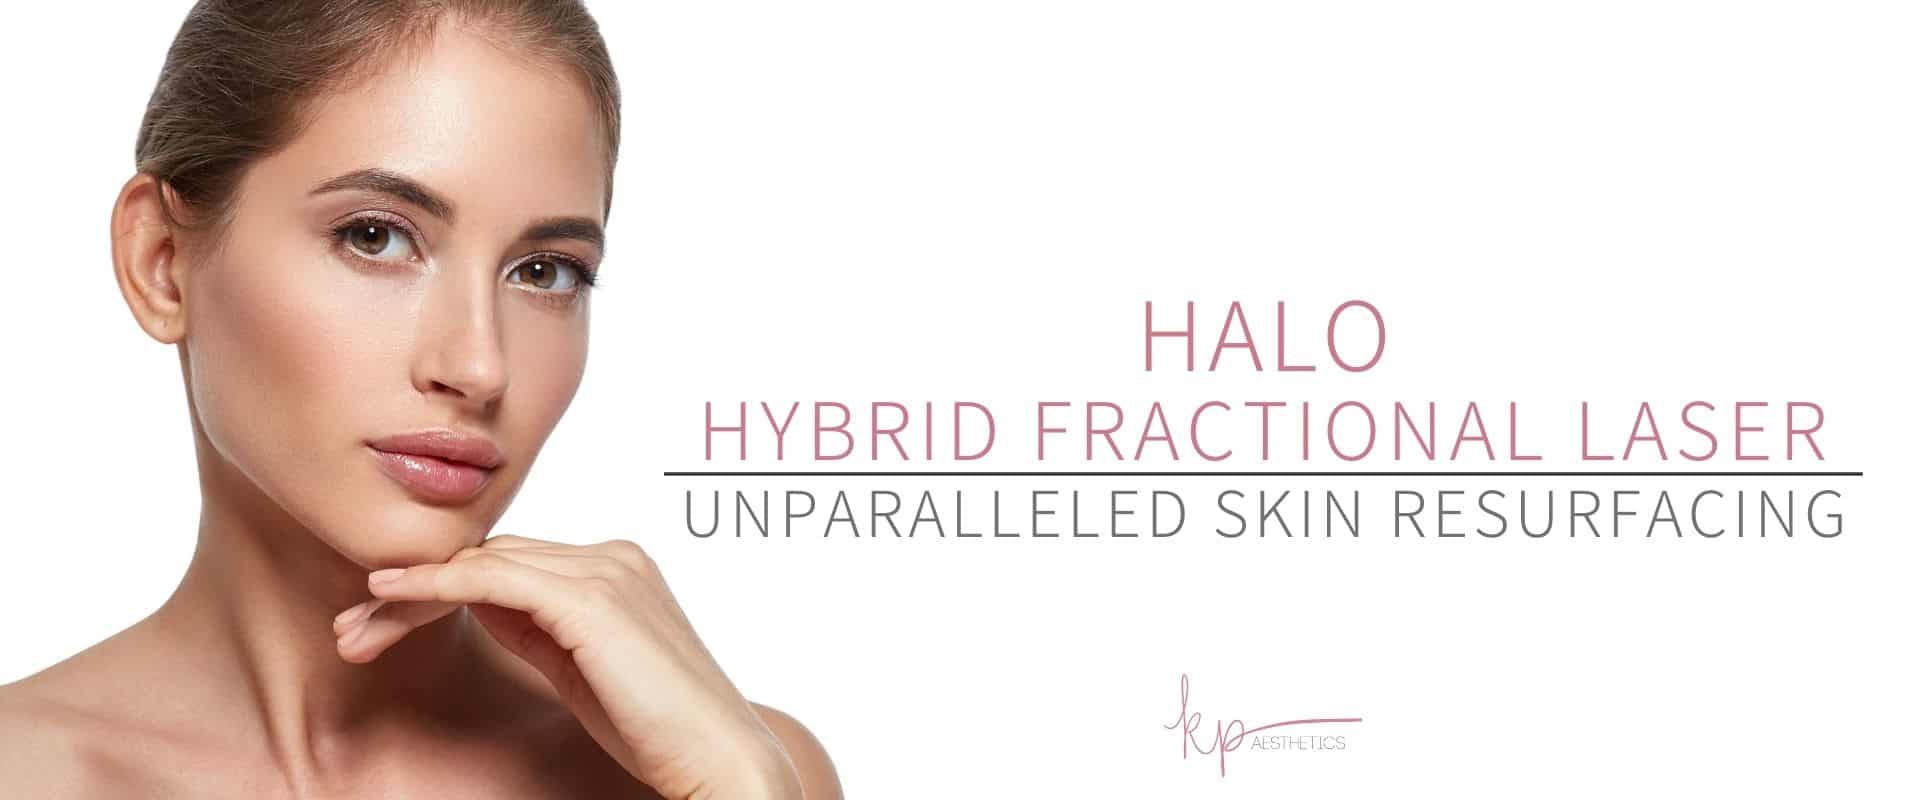 Woman with rejuvenated face promoting a Silhouette Halo Hybrid Fractional Laser